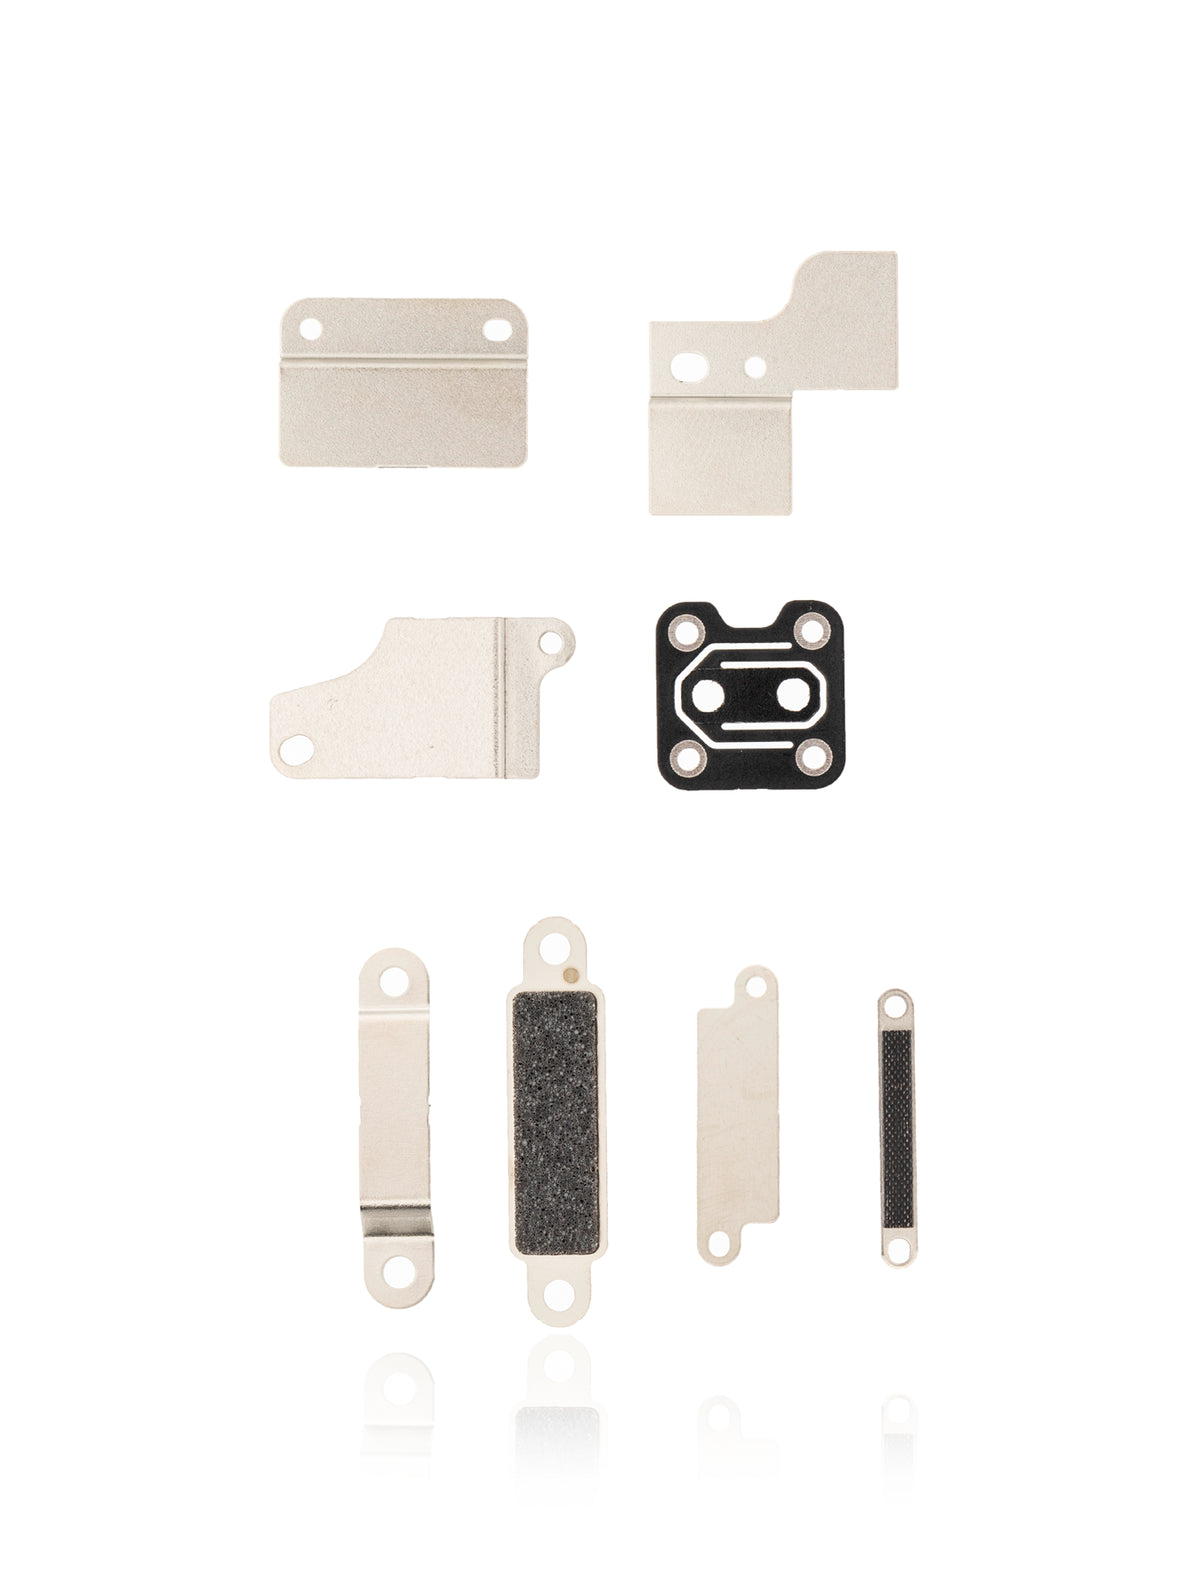 FULL SET SMALL METAL BRACKET FOR MACBOOK PRO 13" A2159 (MID 2019)